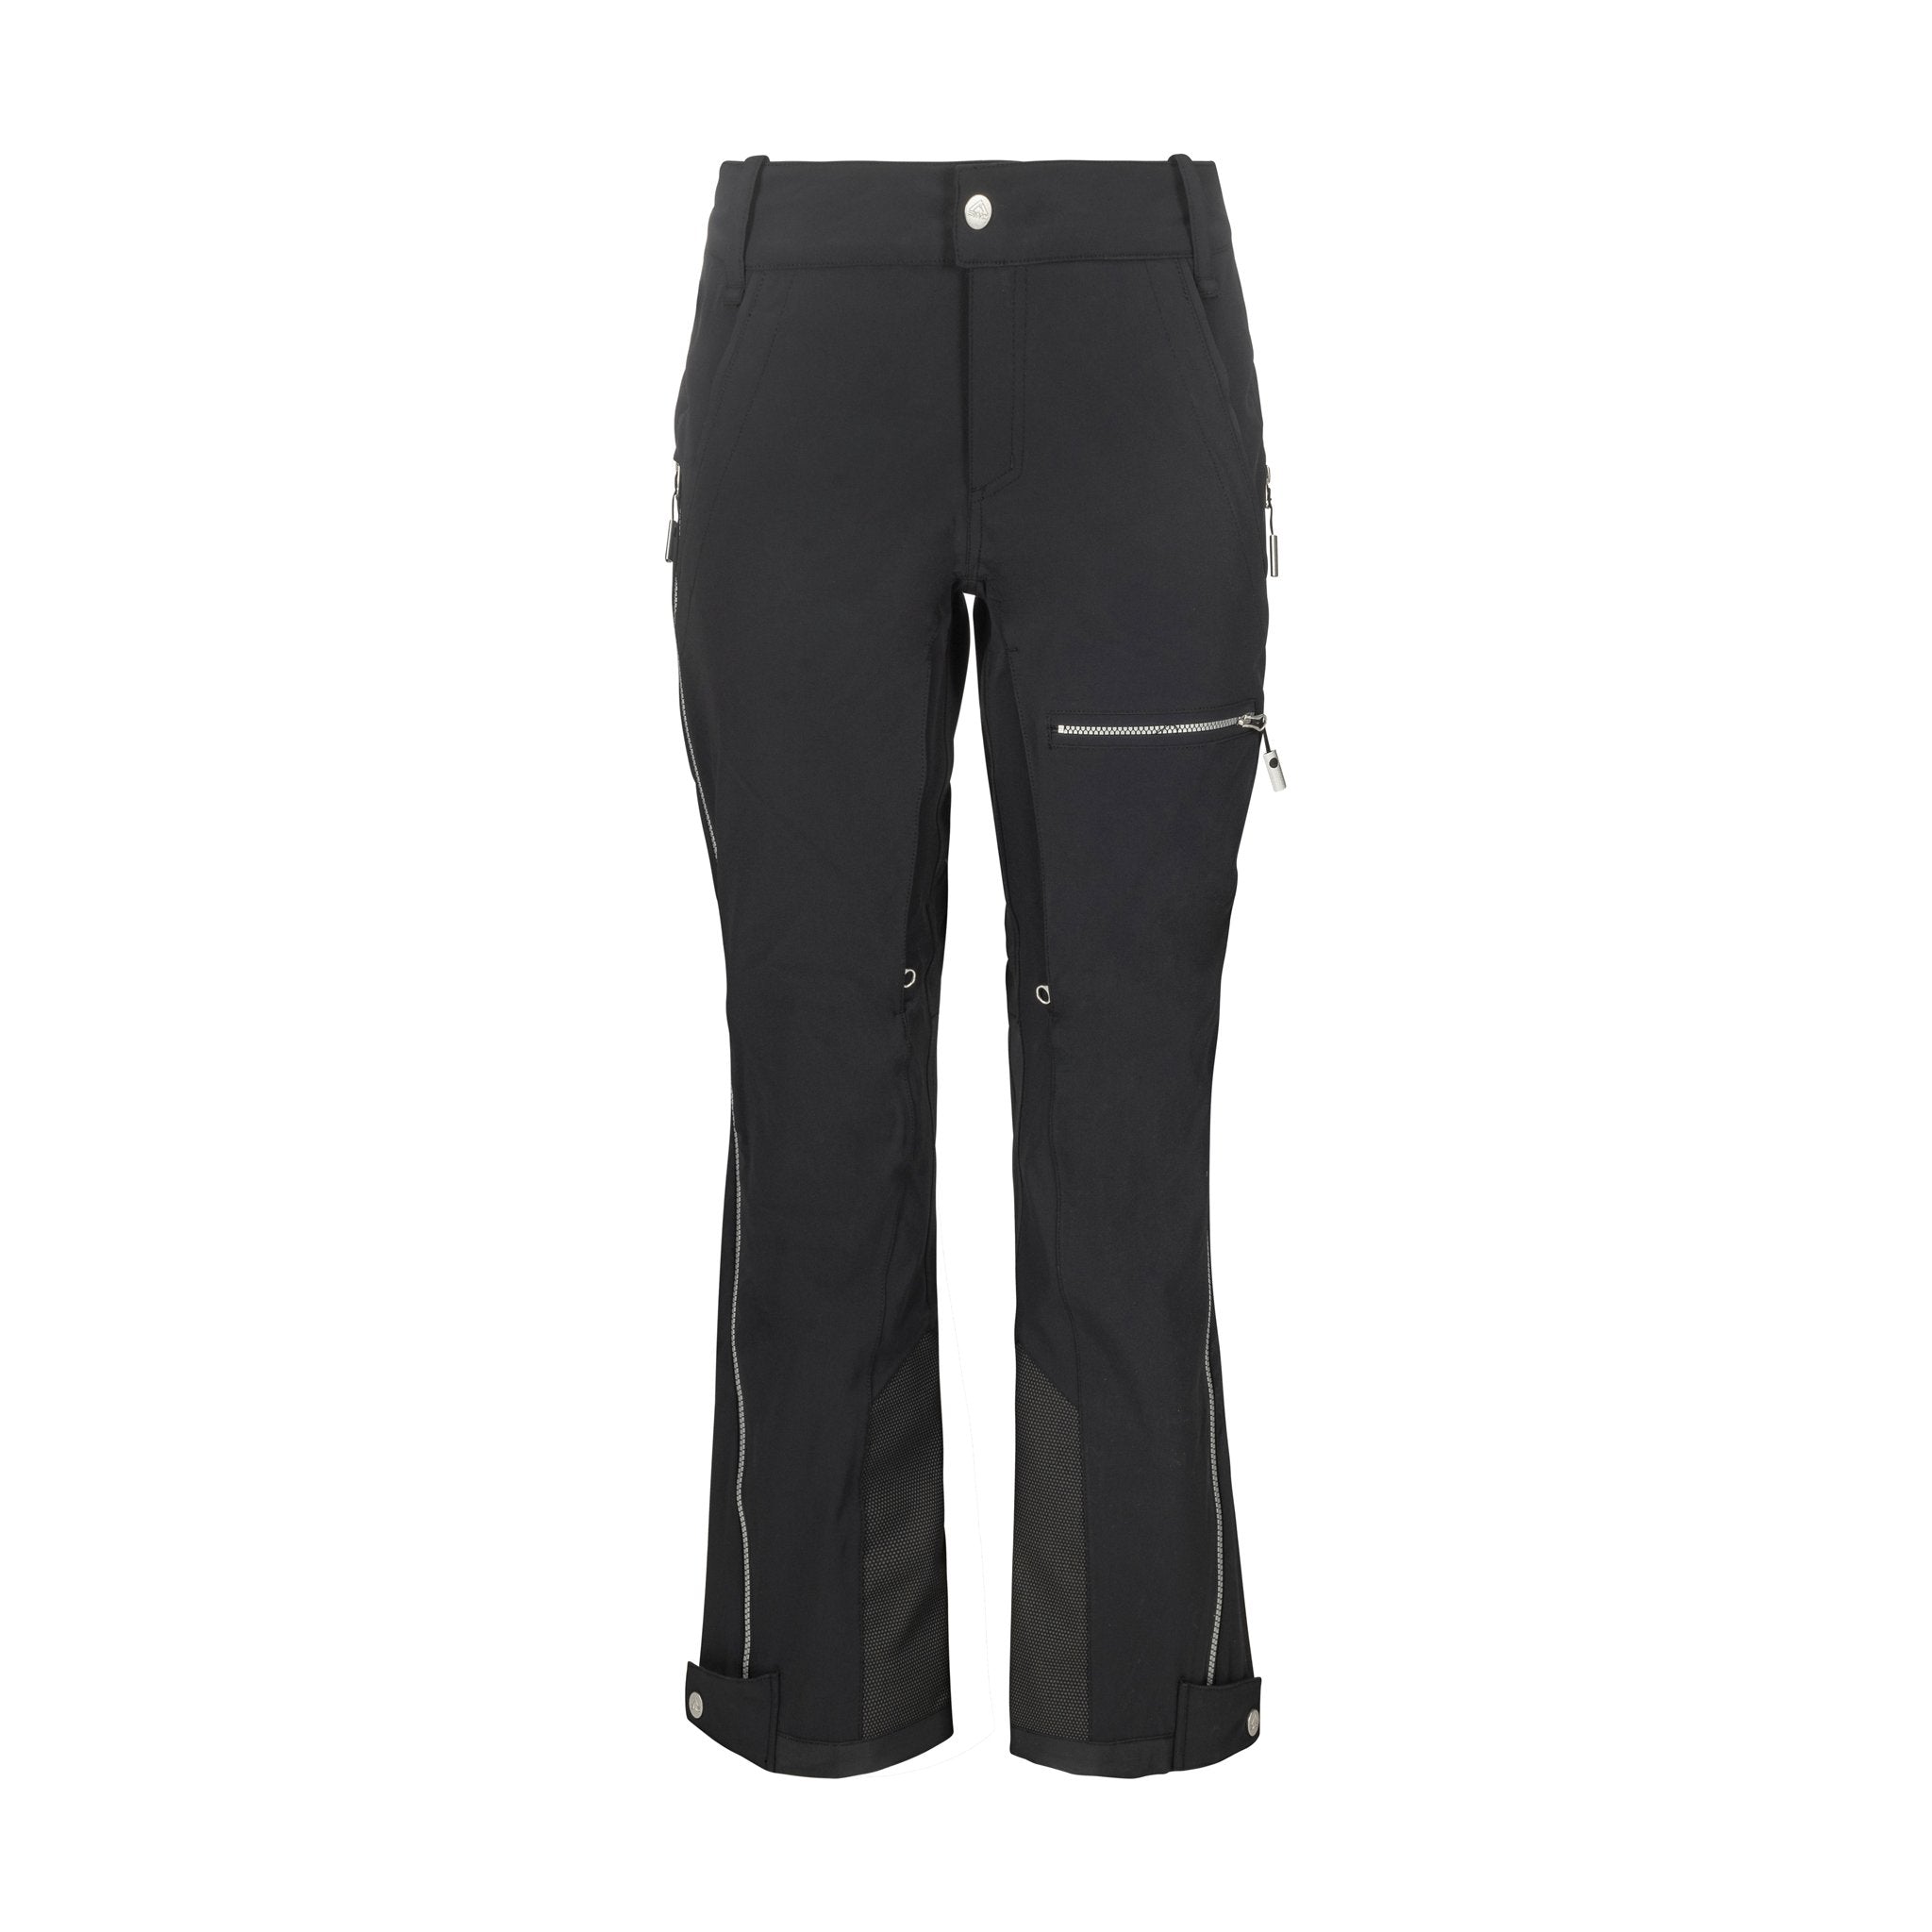 Insulated Ski Pants for Women